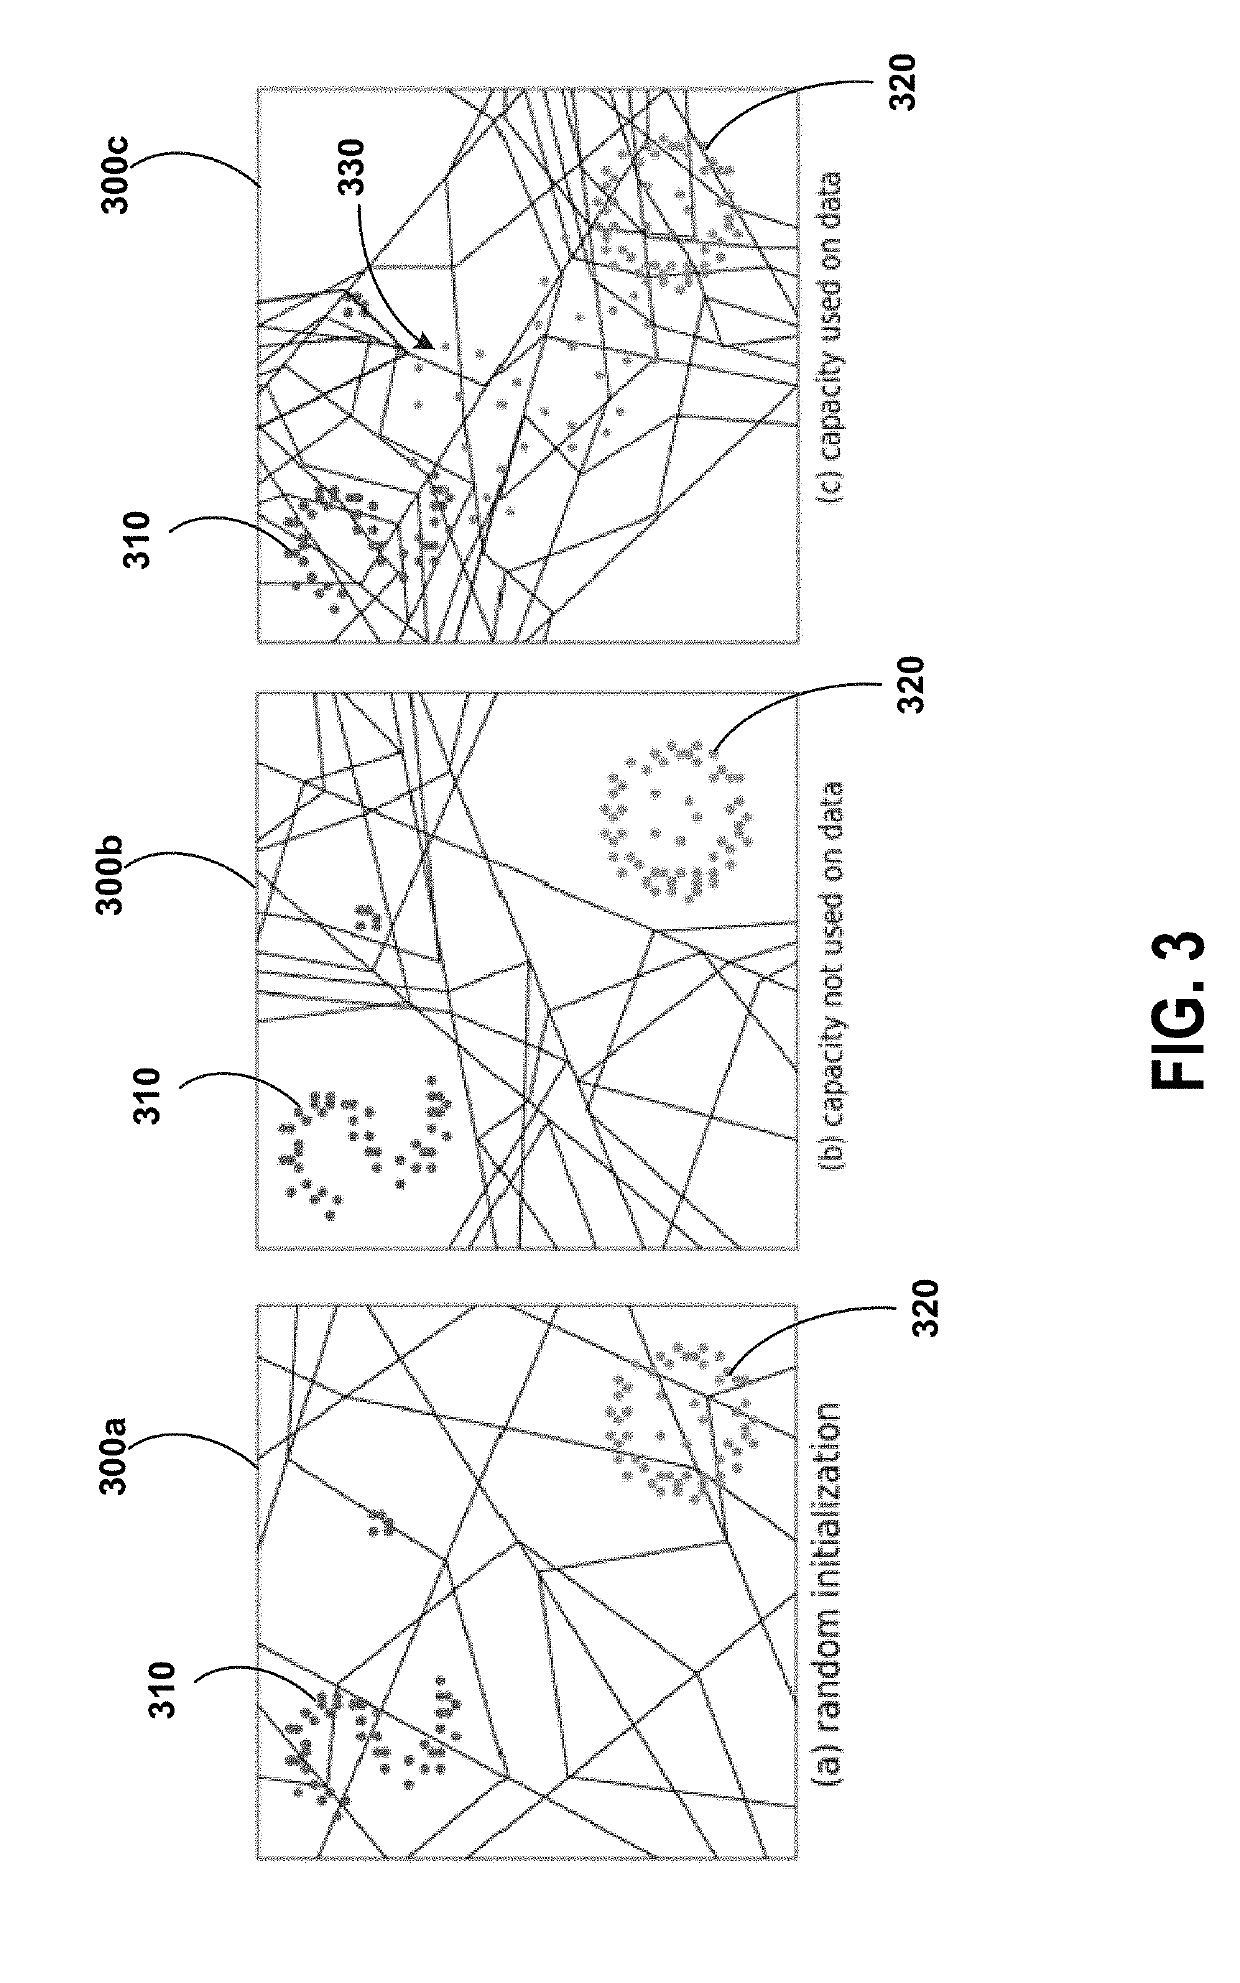 System and method for improved neural network training